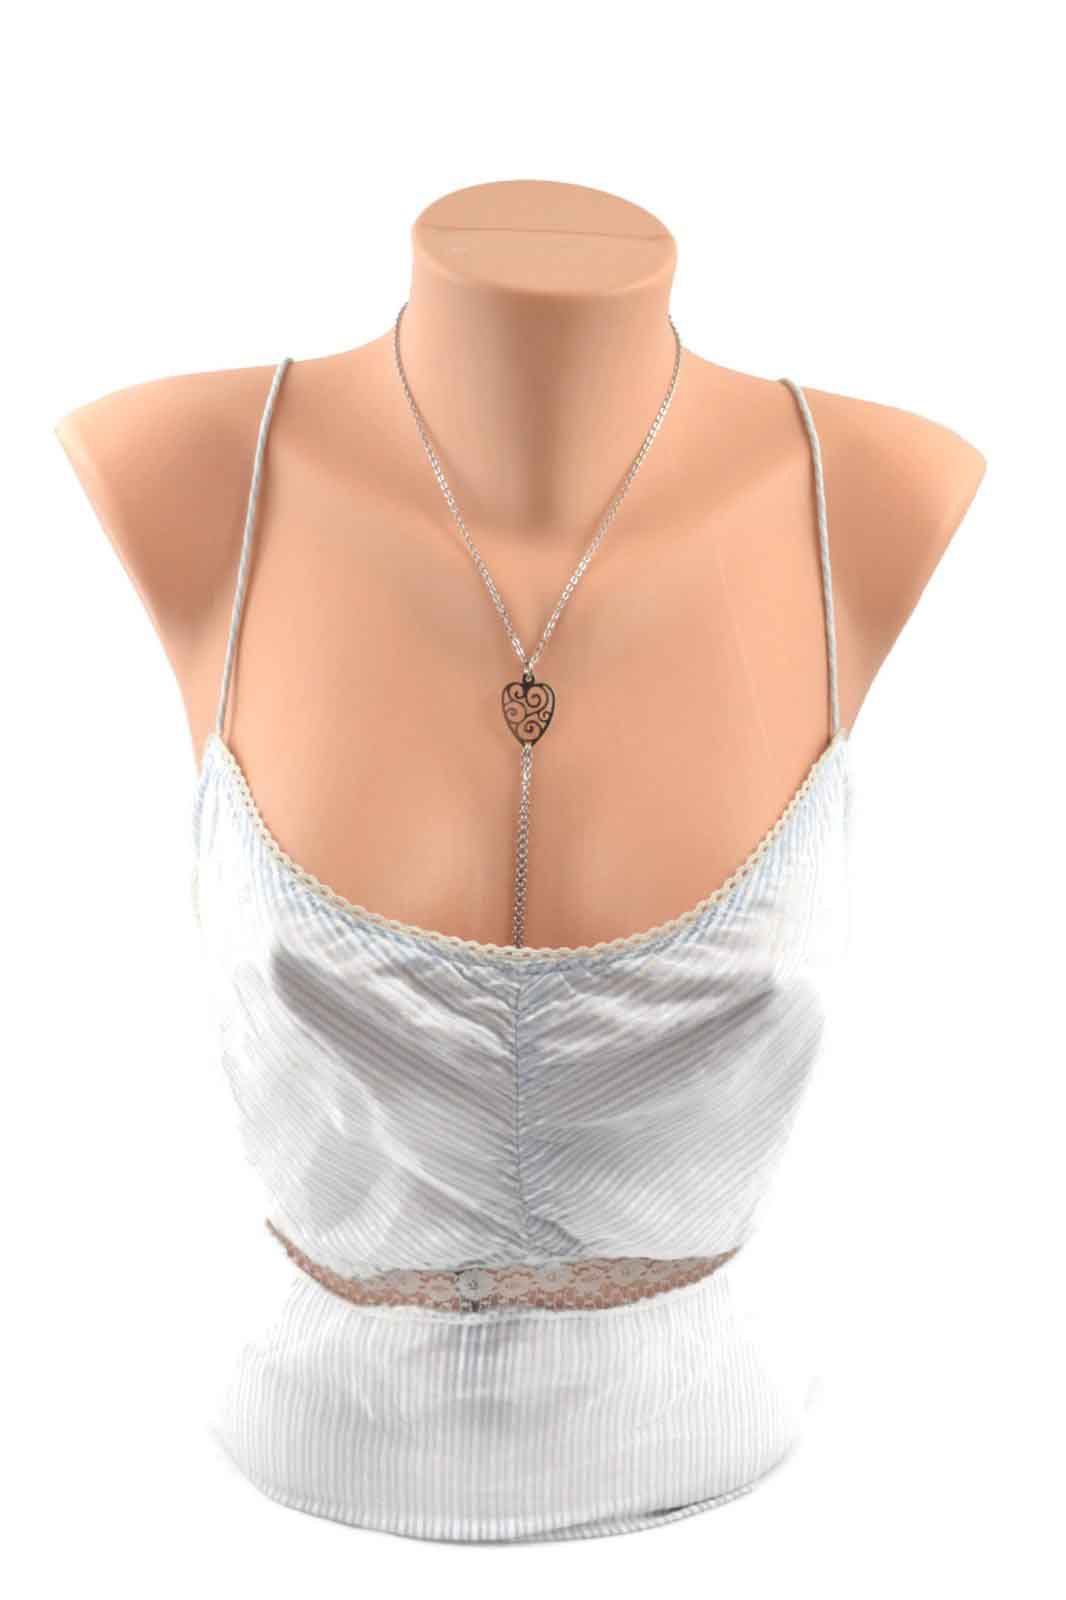 The Unchained Heart Collar with Nipple Chain on a mannequin wearing a silver camisole.